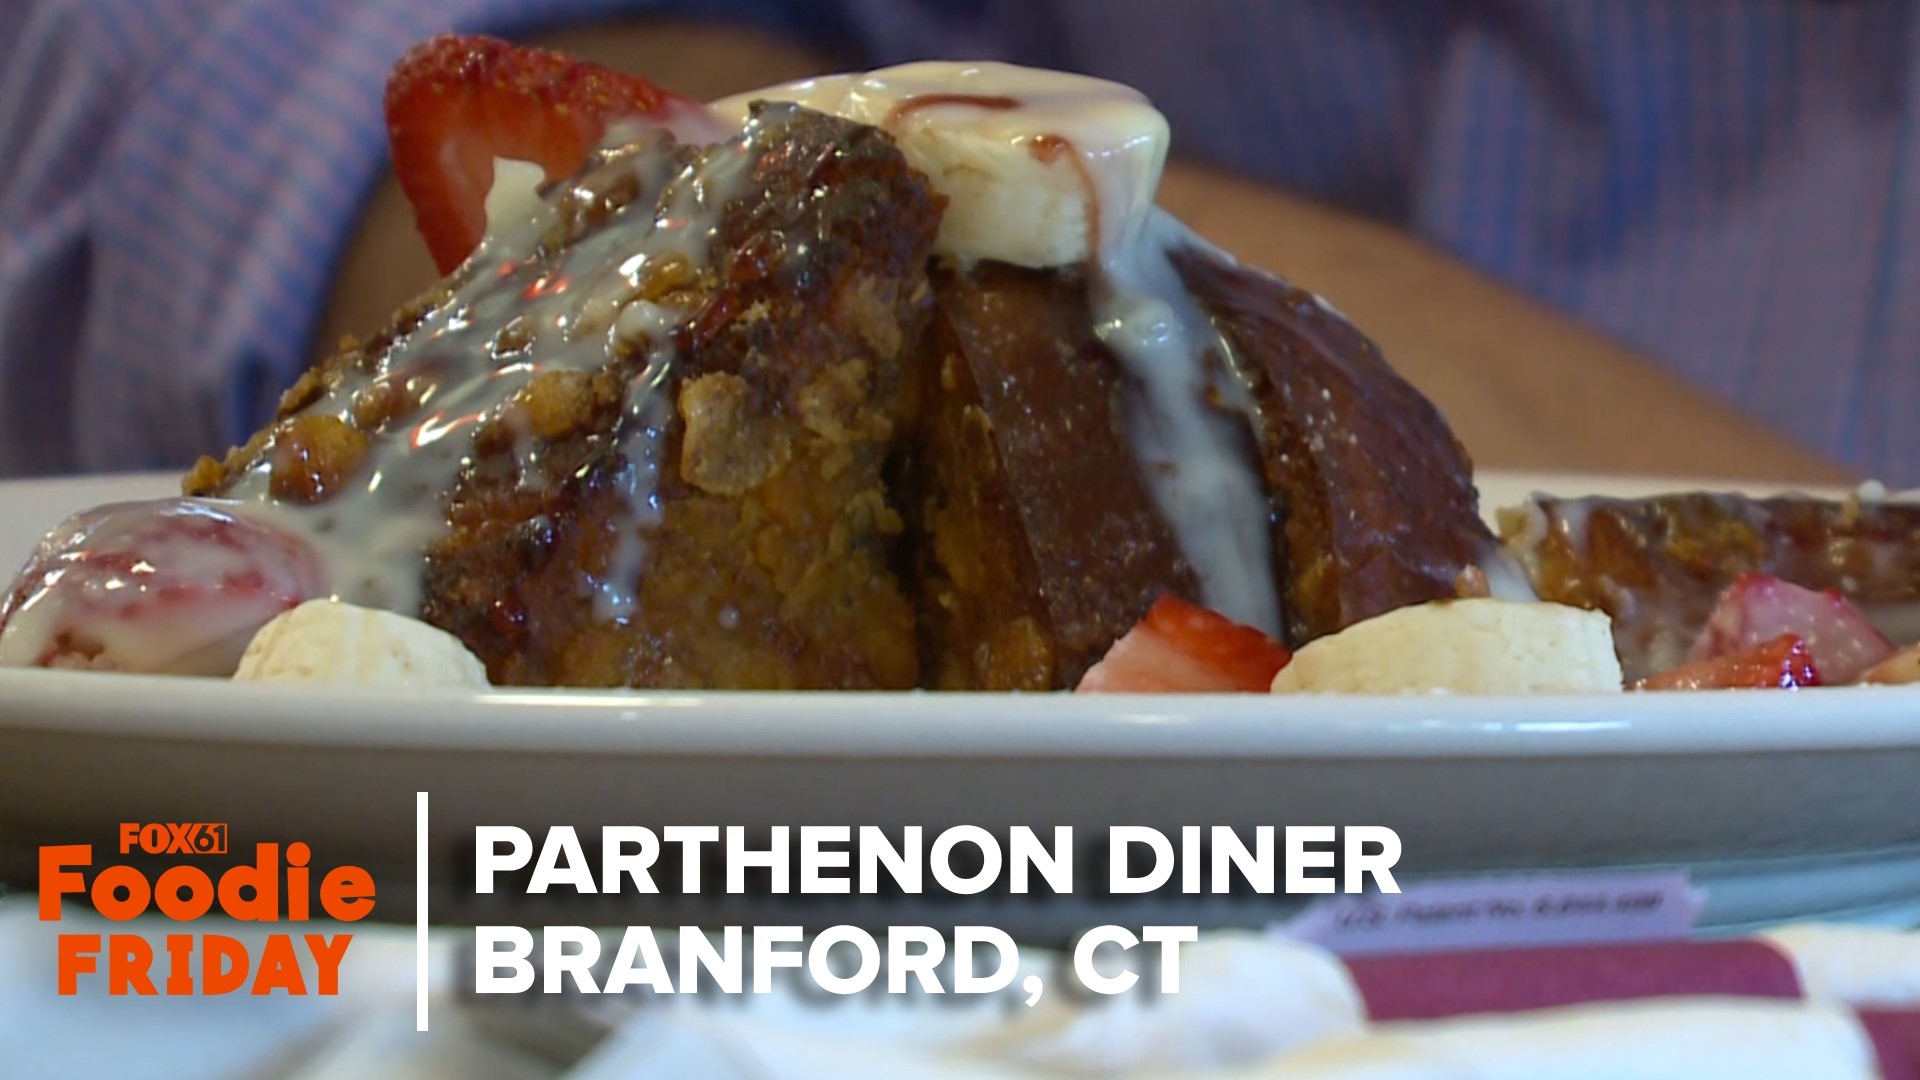 FOX61's Matt Scott went to Parthenon Diner and Restaurant in Branford, where customers can get some great Greek food or some breakfast classics.